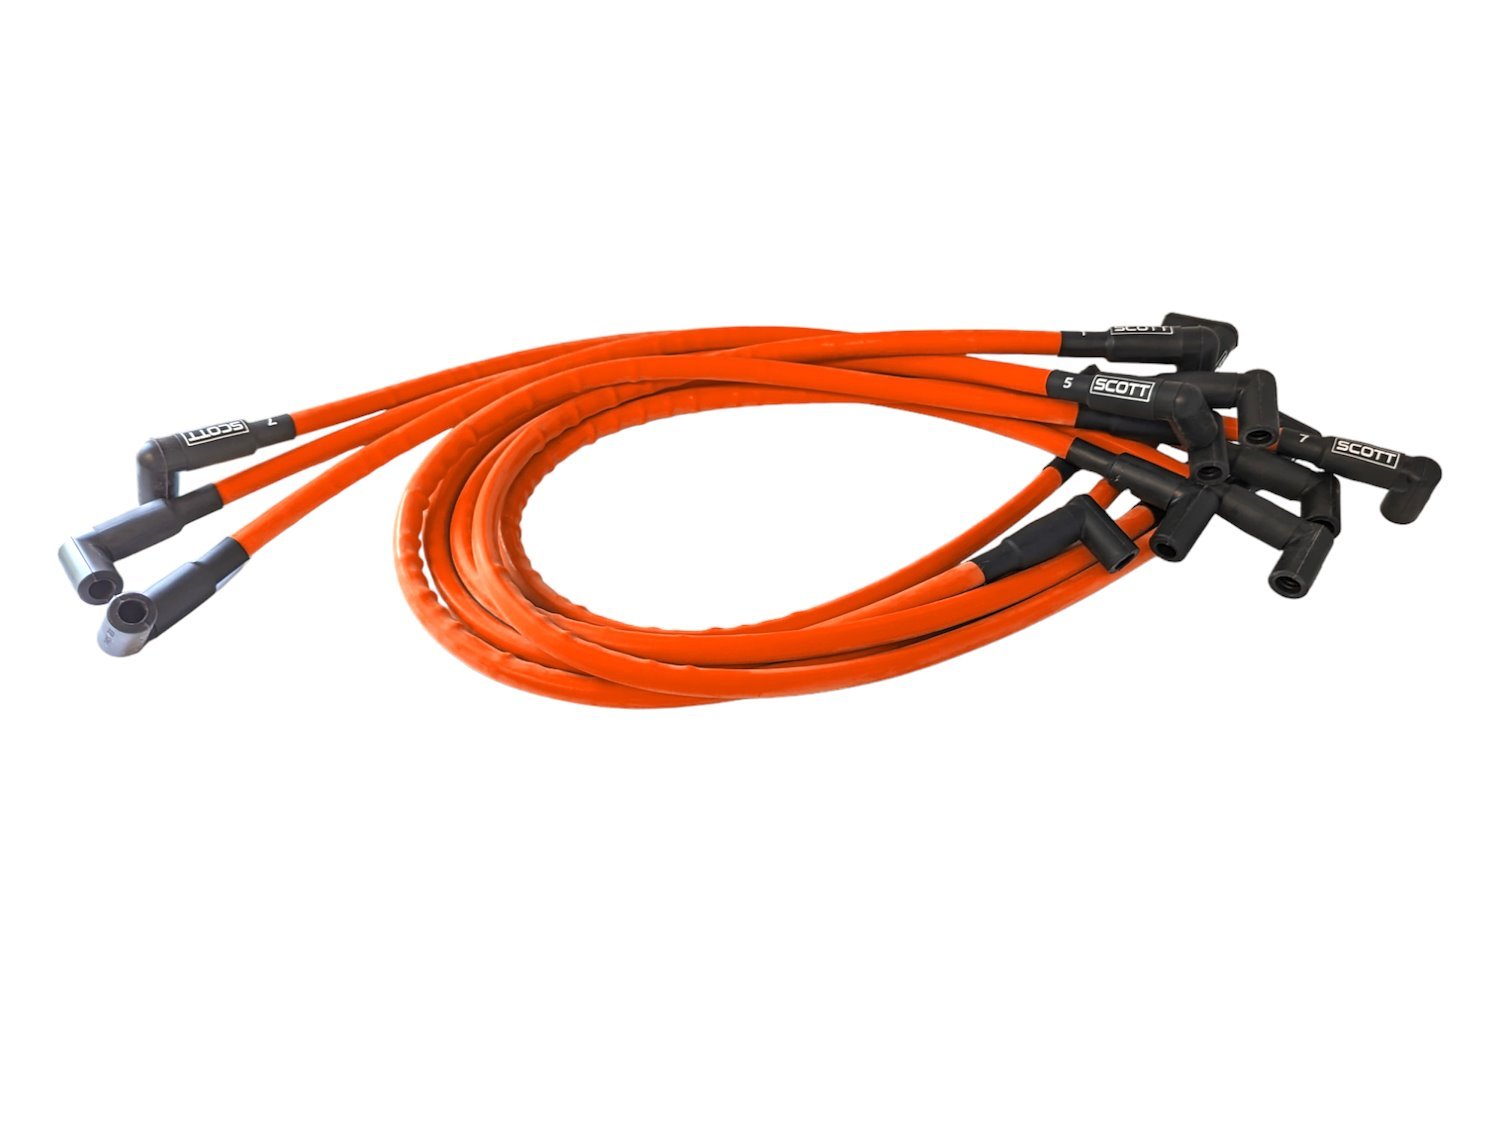 SPW-CH-439-9 High-Performance Silicone-Sleeved Spark Plug Wire Set for Small Block Ford, Under Header [Fluorescent Orange]